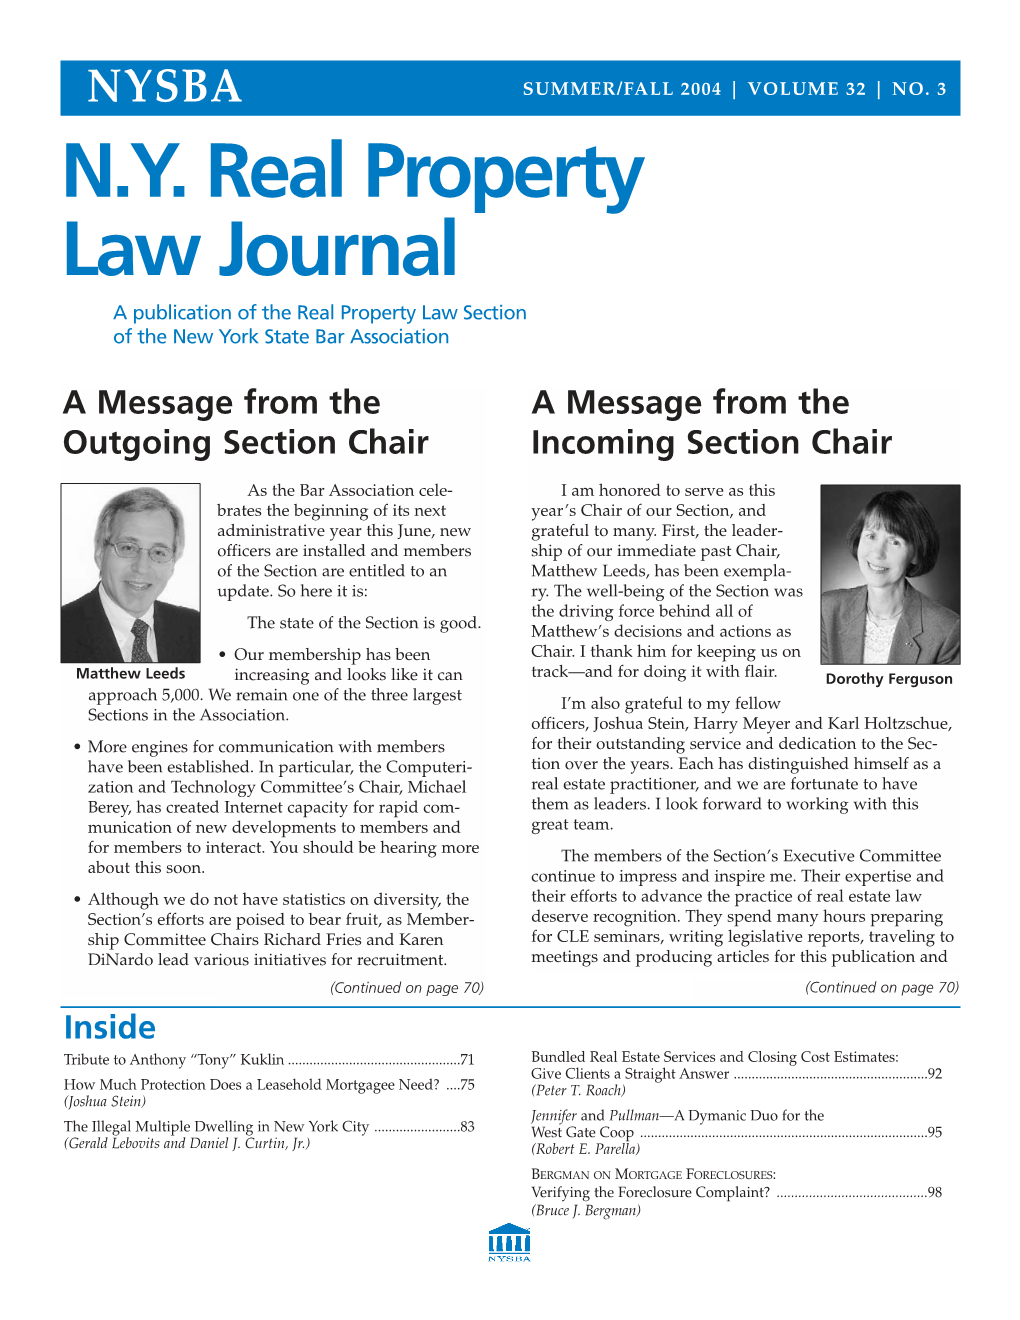 N.Y. Real Property Law Journal a Publication of the Real Property Law Section of the New York State Bar Association